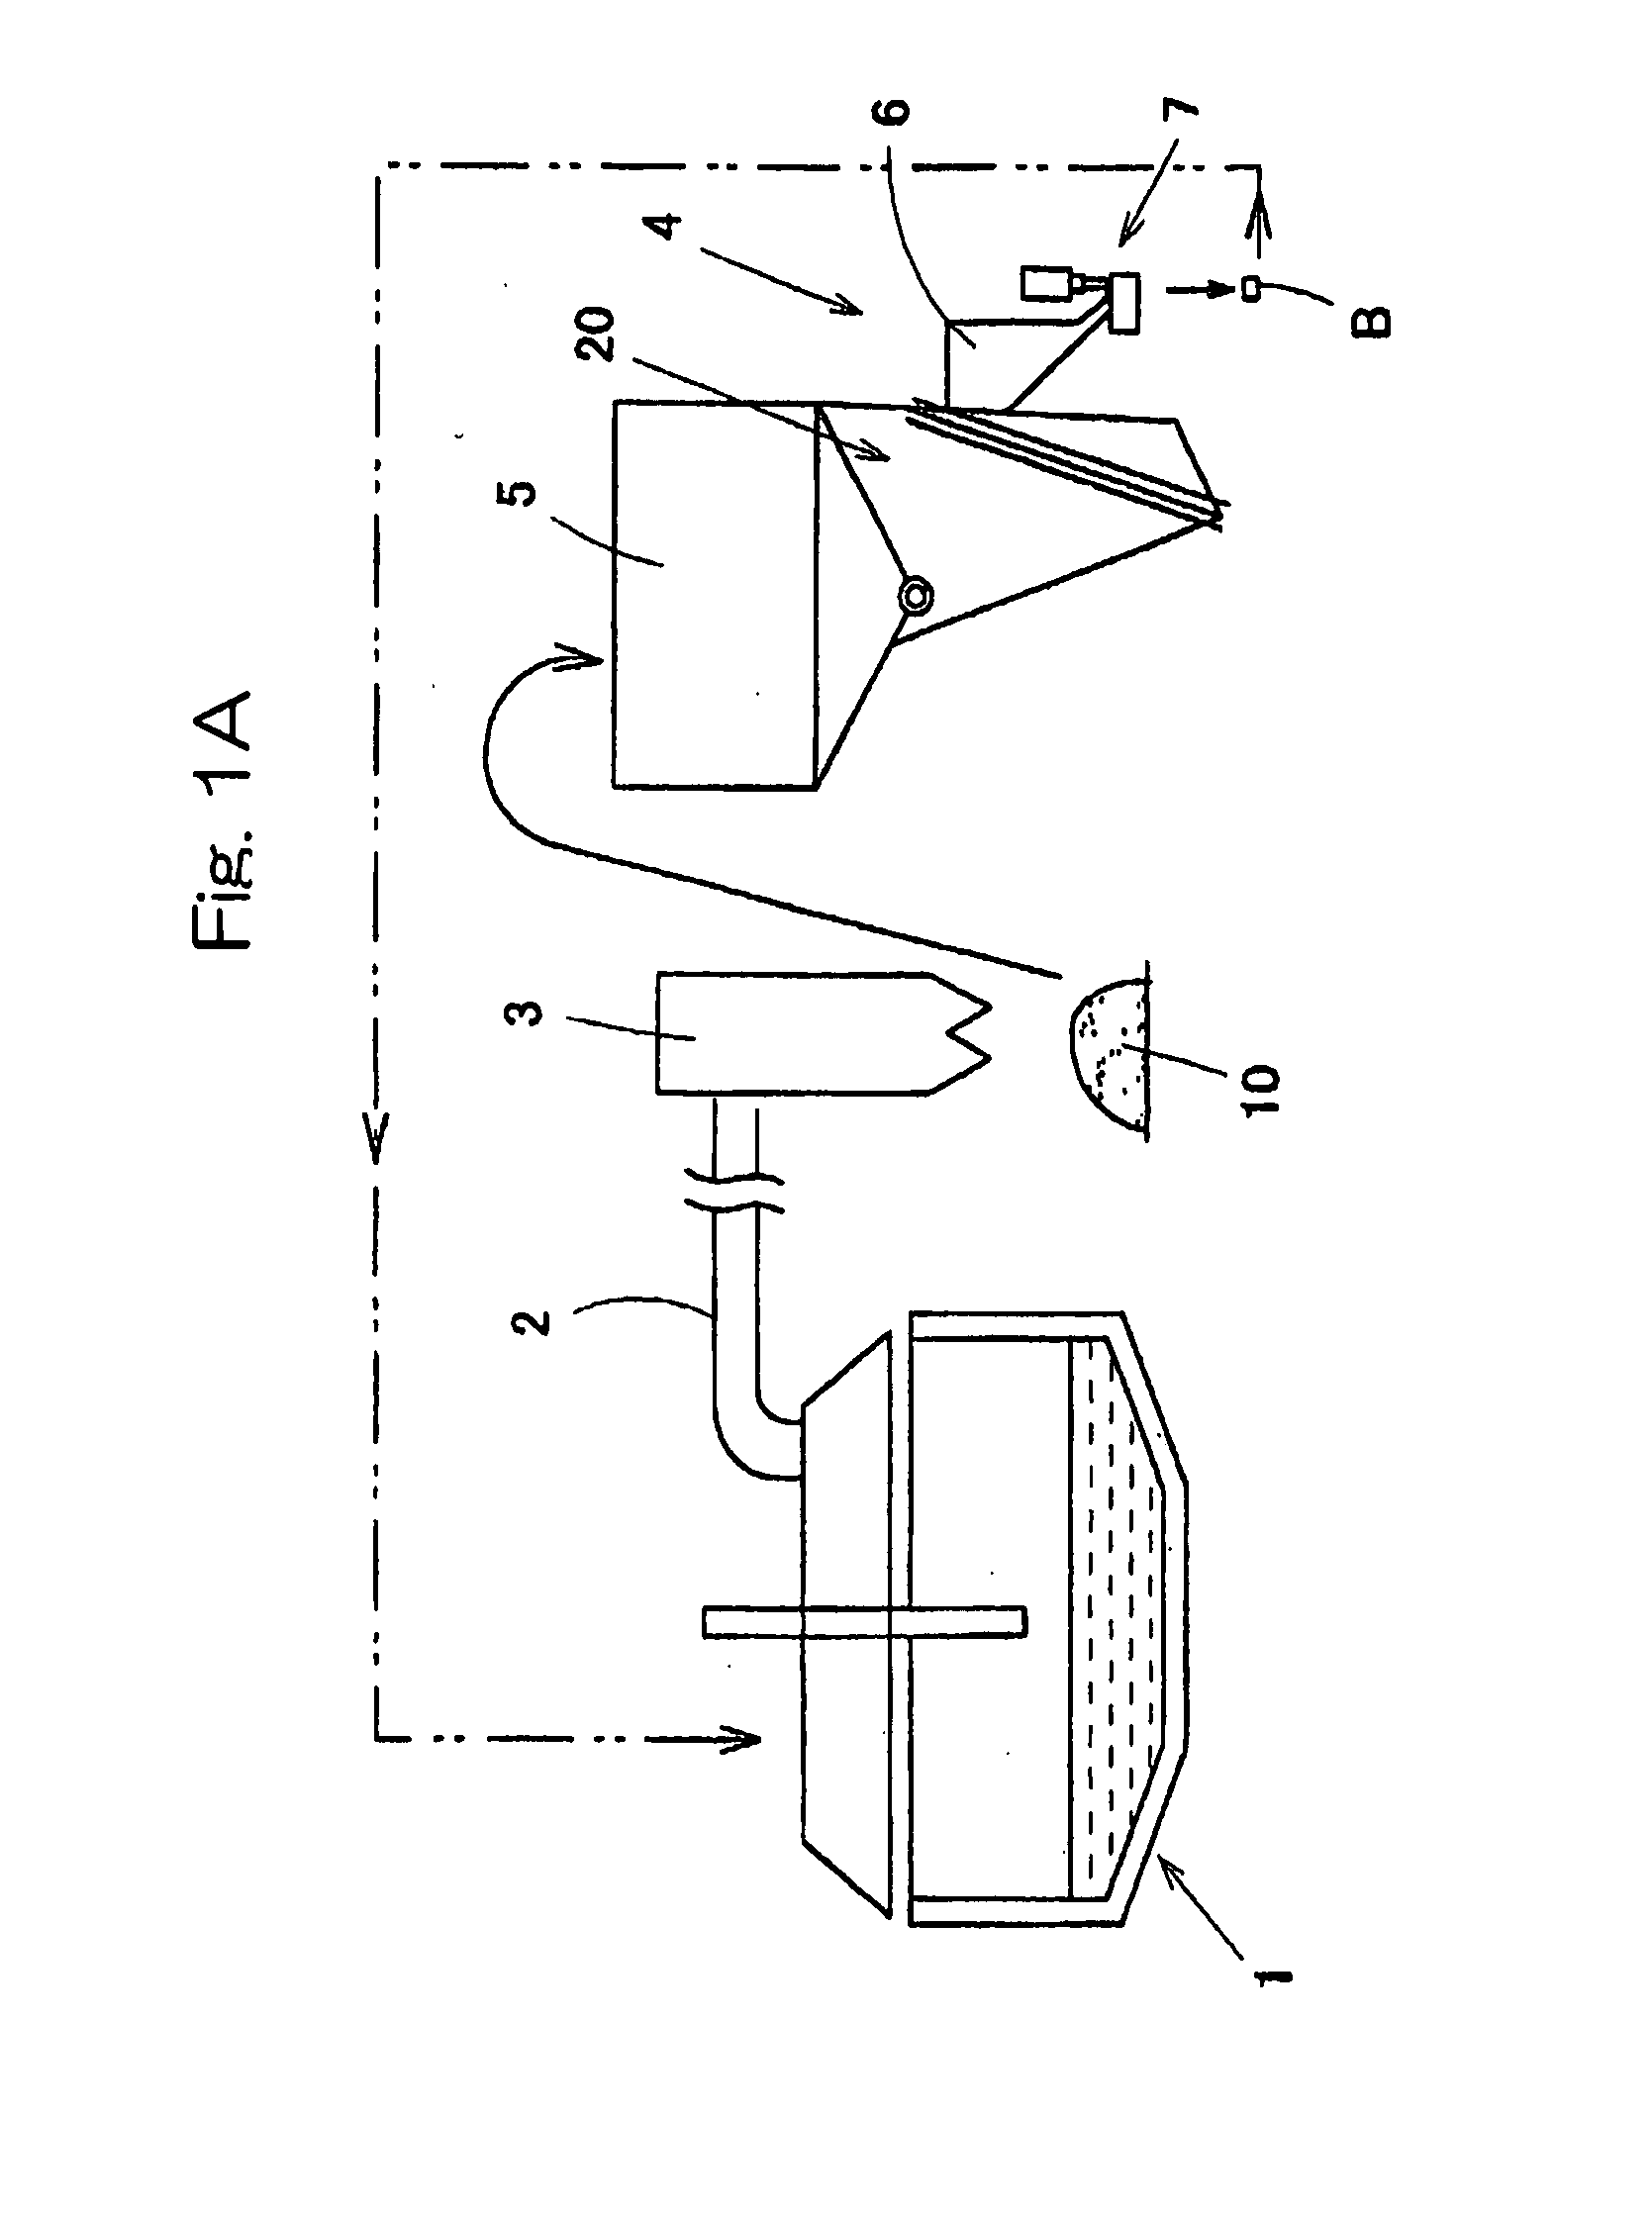 Steel manufacturing dust solidified, process for producing the same and production apparatus therefor